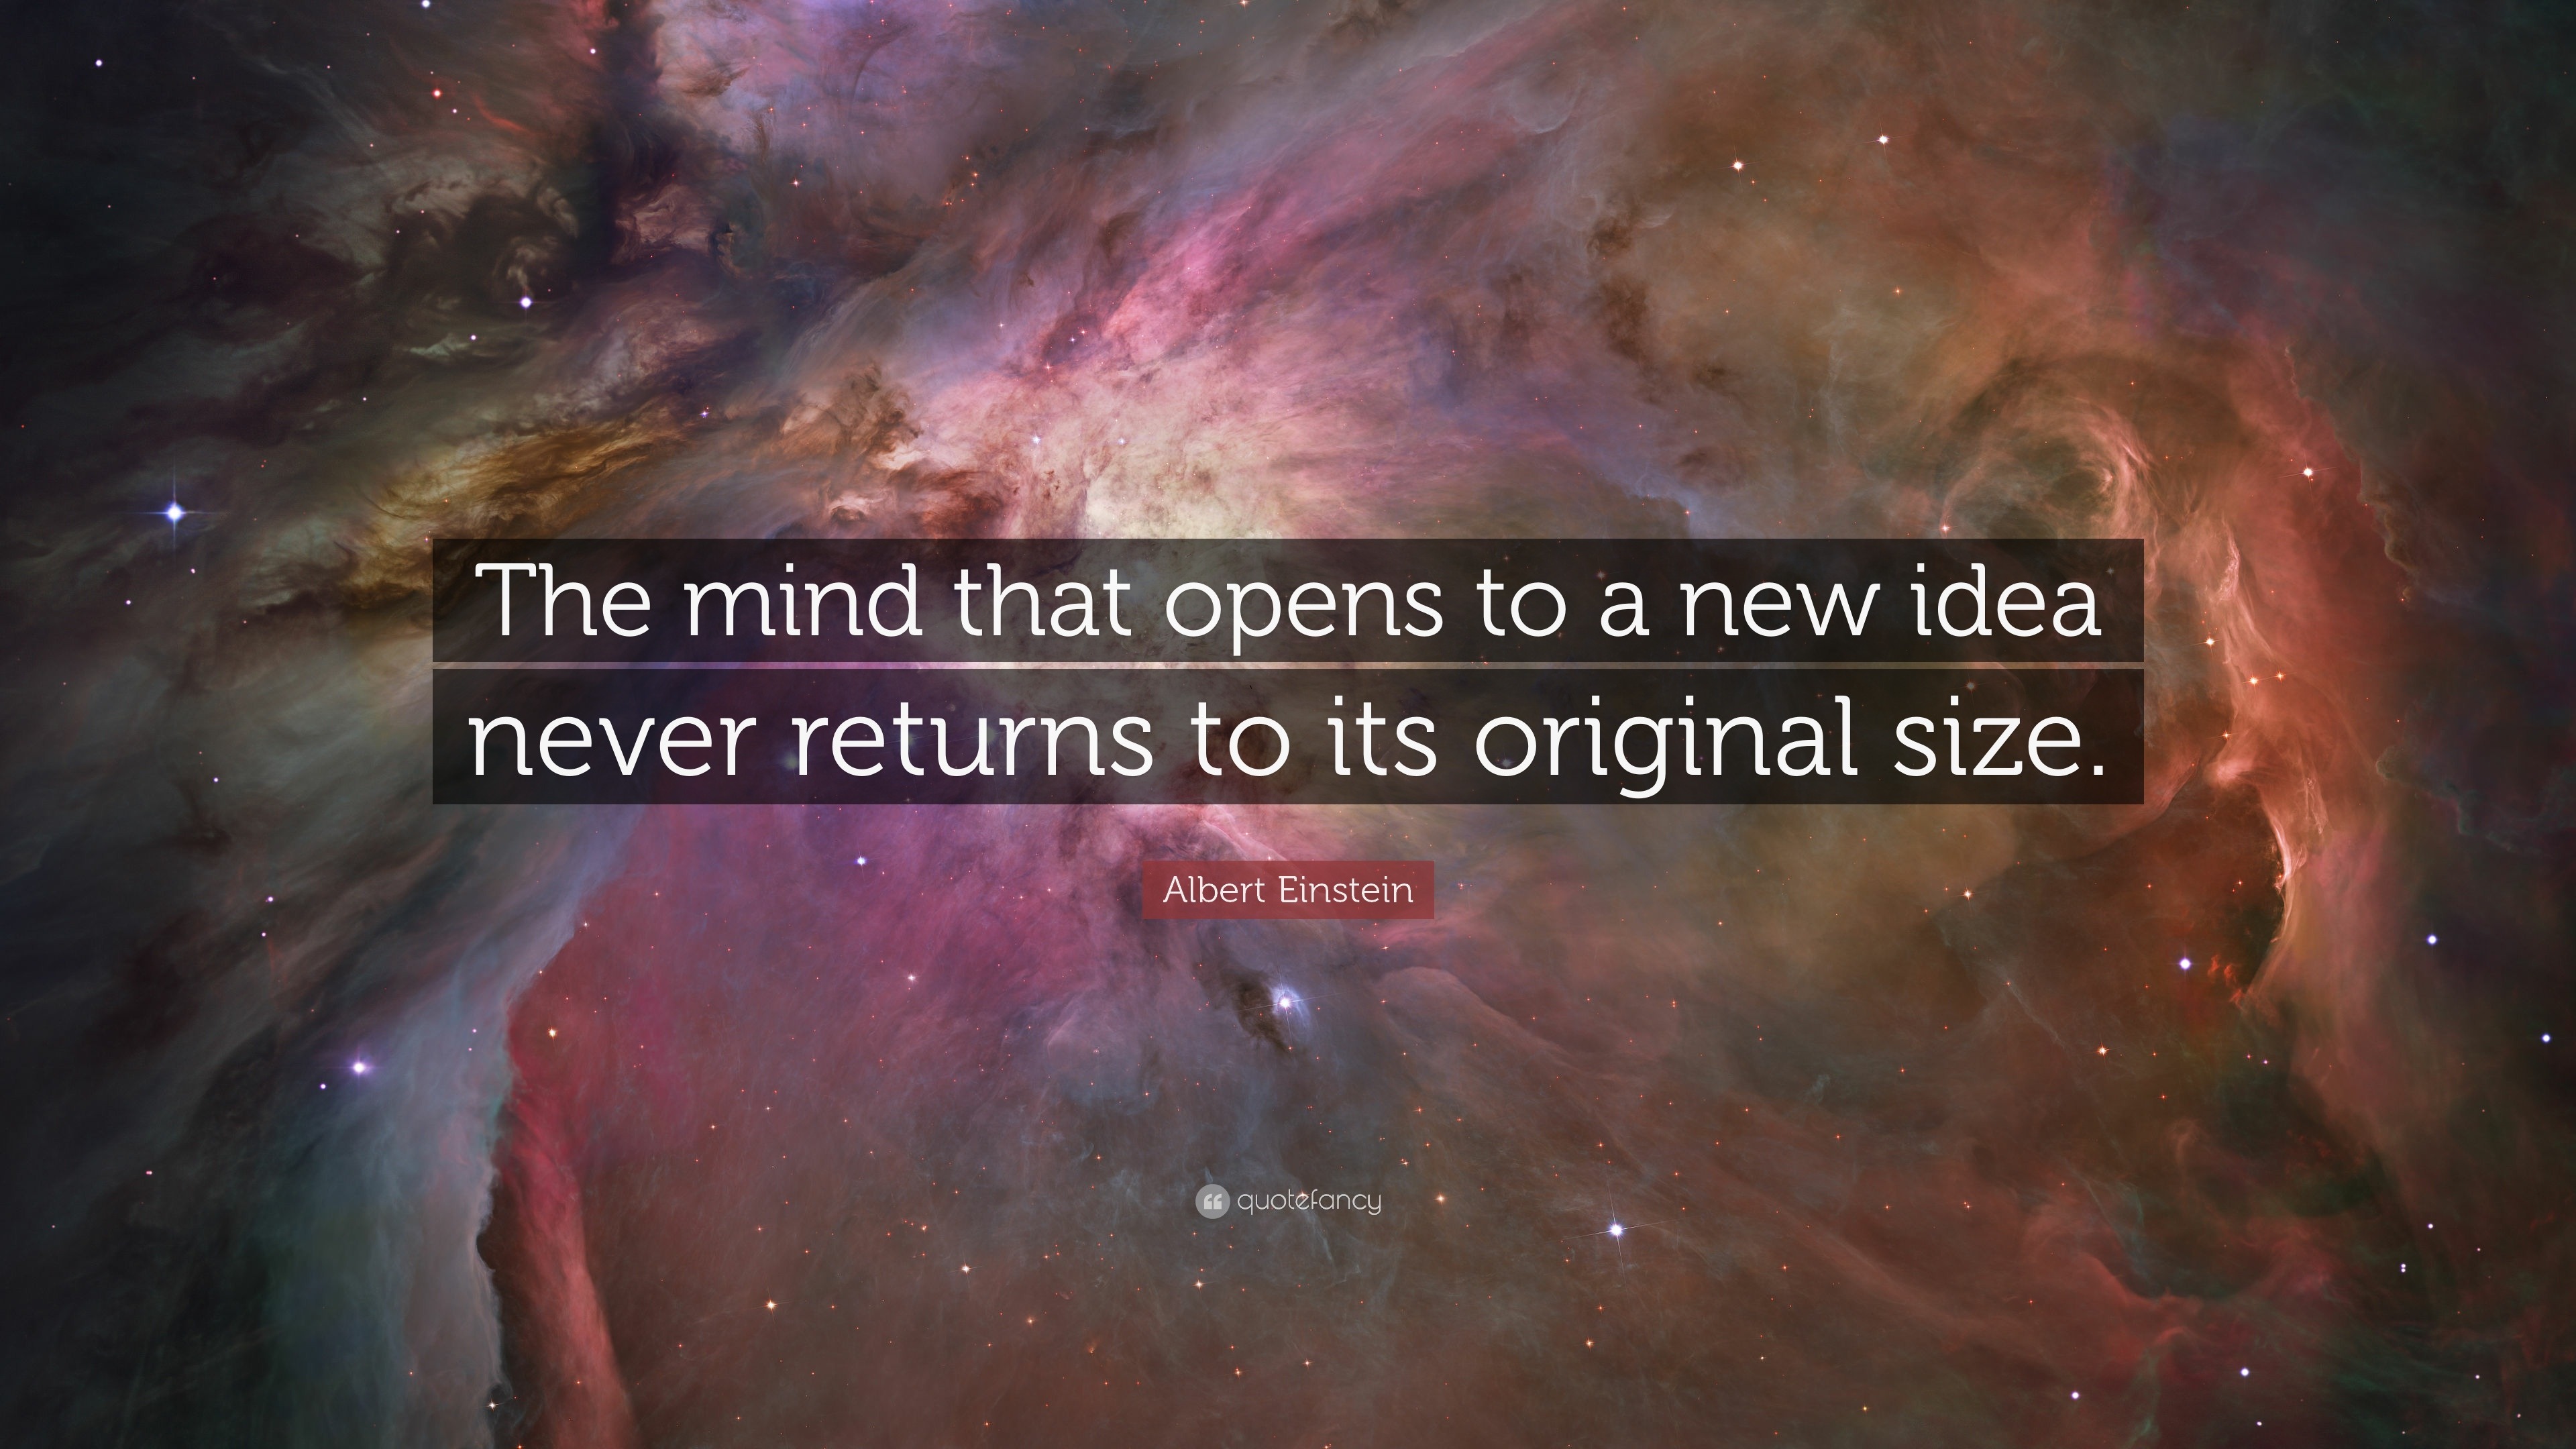 Albert Einstein Quote: “The mind that opens to a new idea never returns to  its original